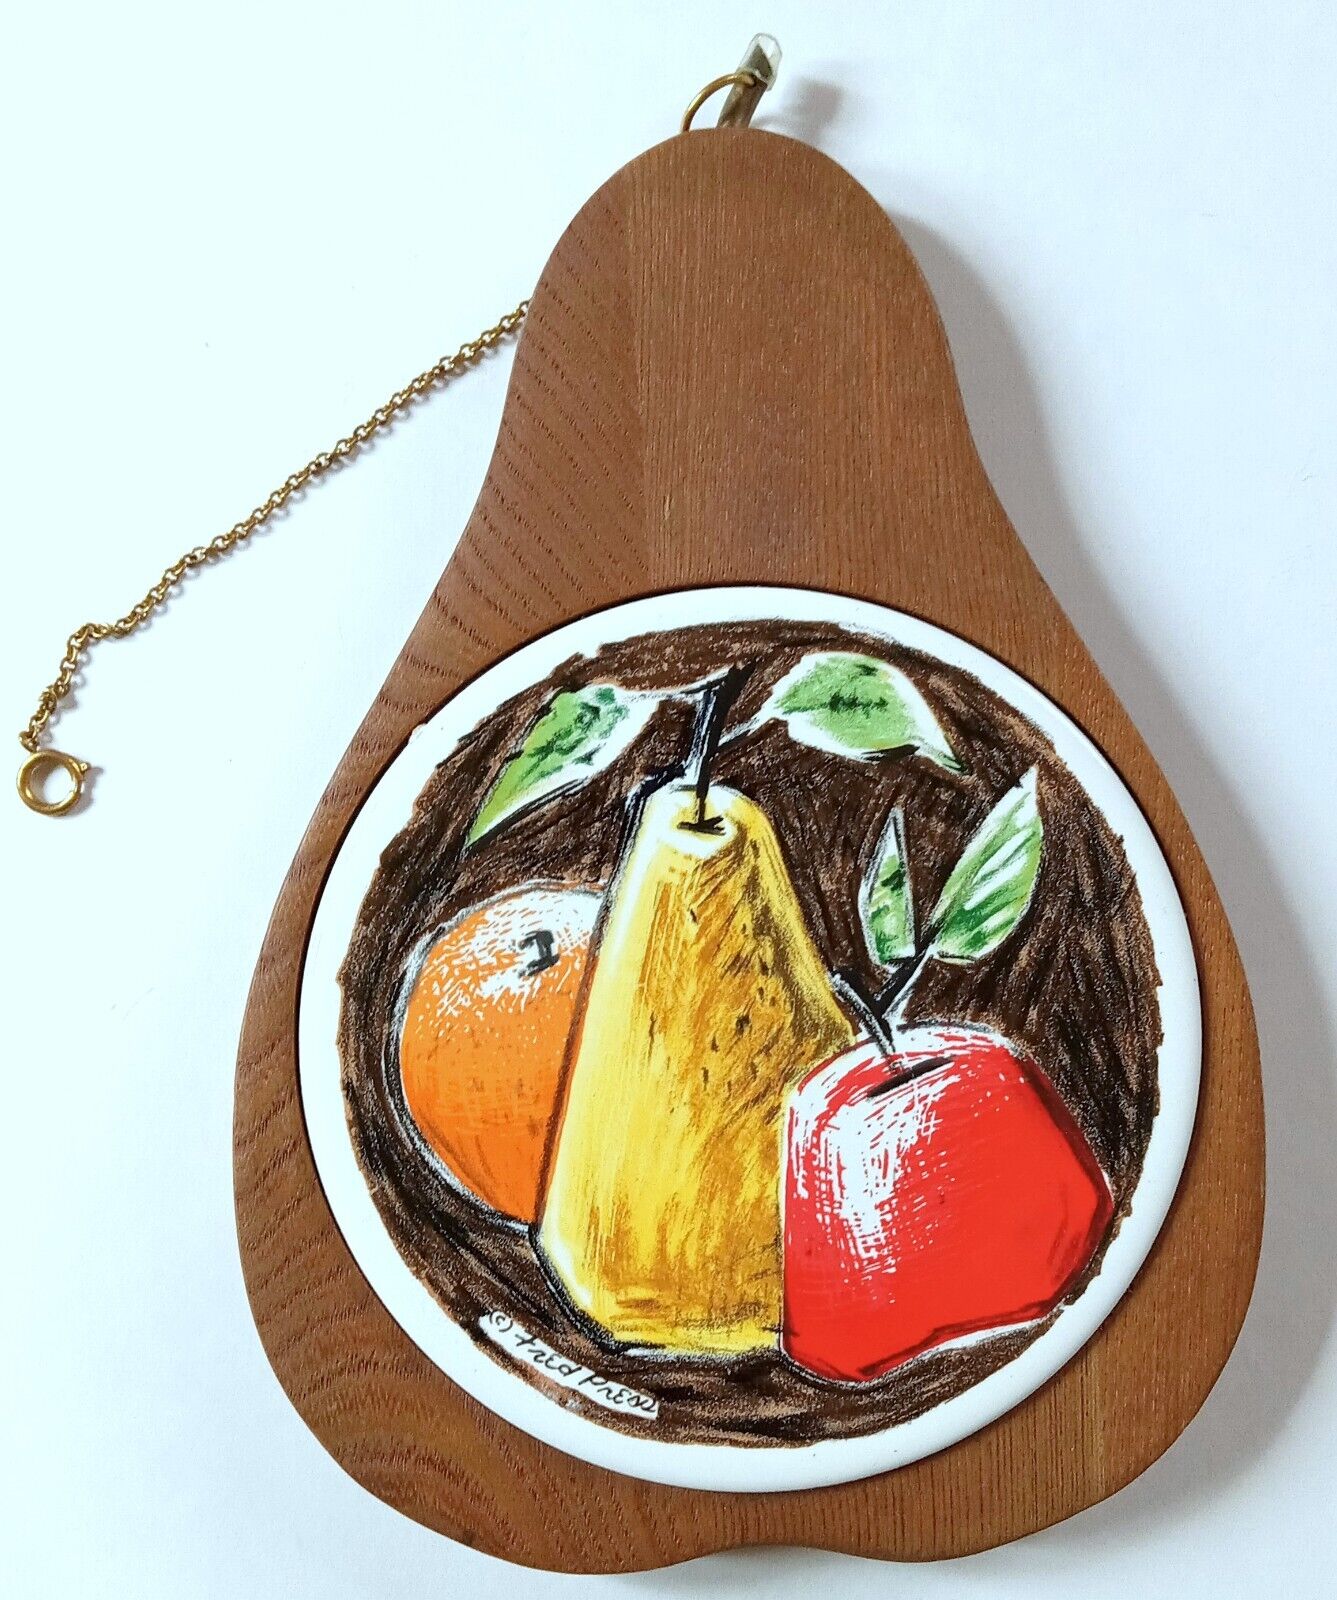 Vtg 60s Signed Fred Press Cheese Board Pear Tile Tray Trivet Mid Century MCM